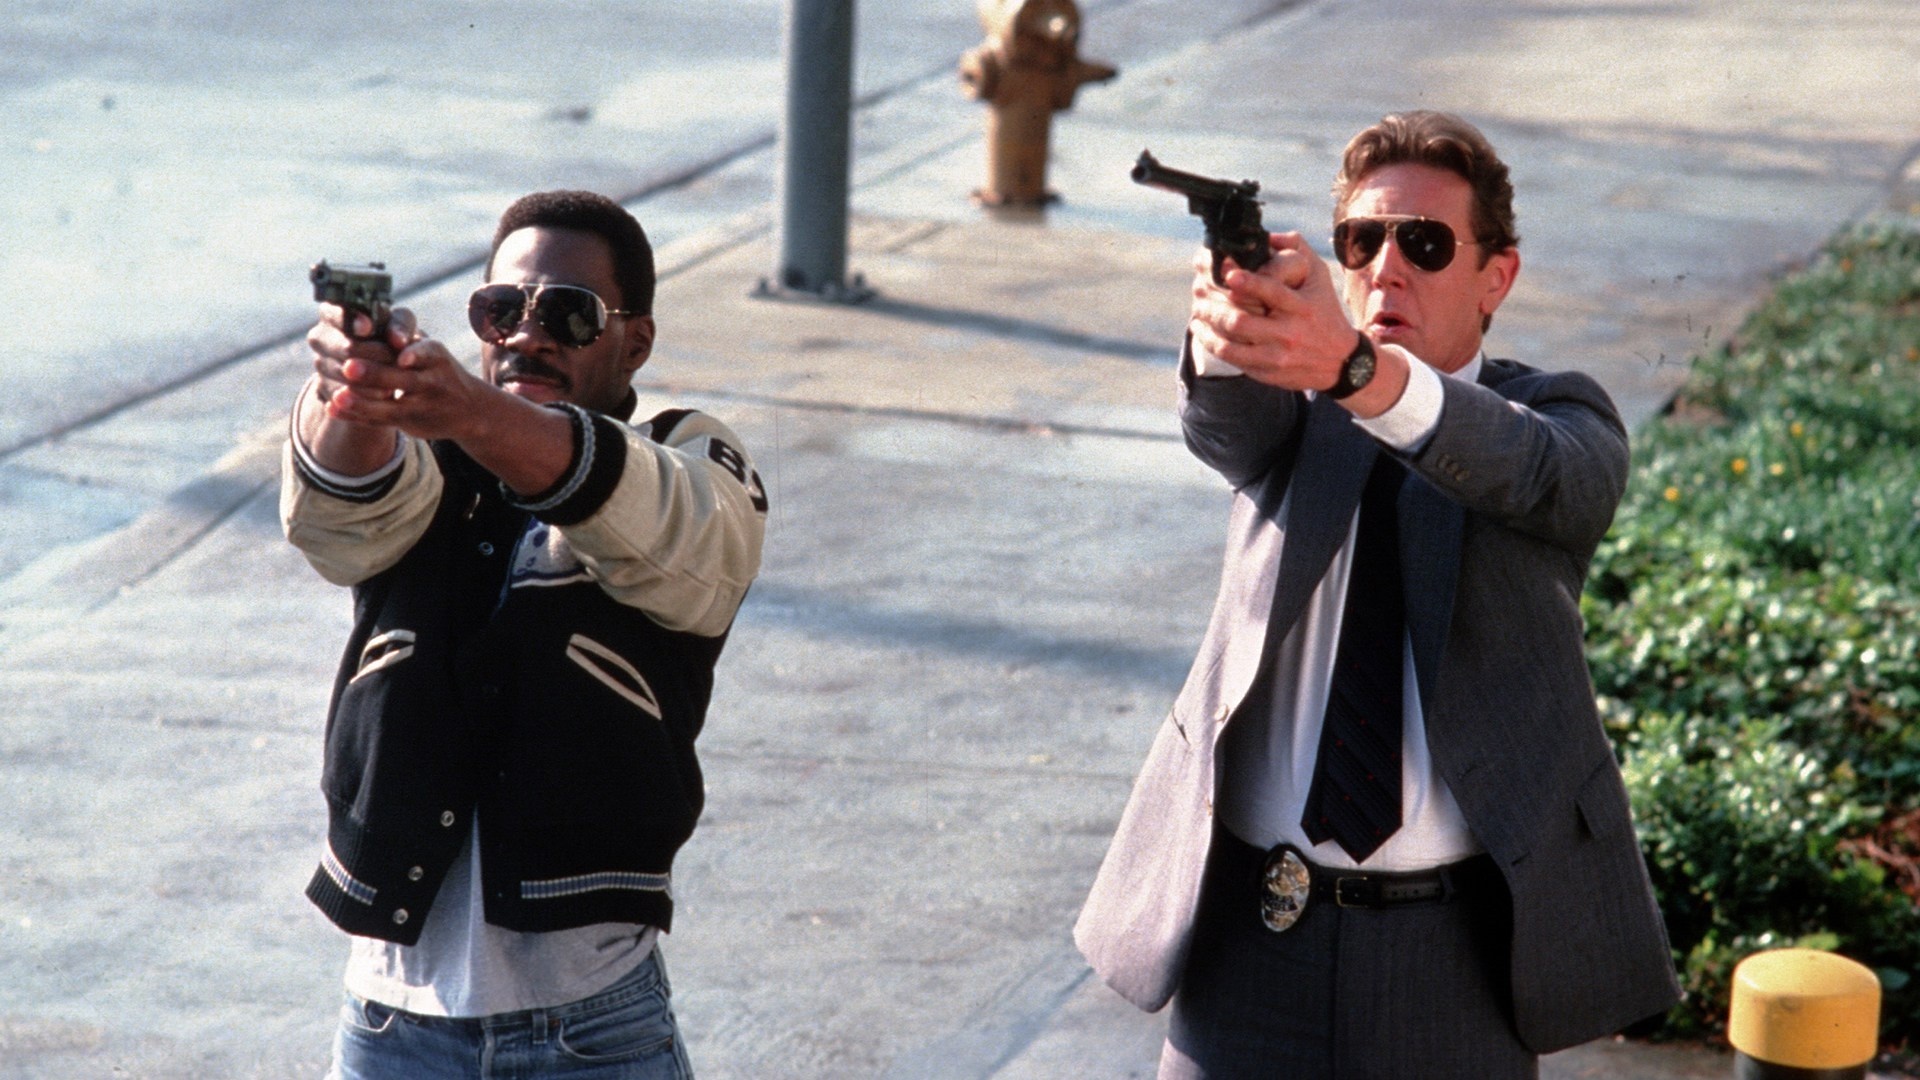 Beverly Hills Cop, 80s action film, Sylvester Stallone cameo, 1920x1080 Full HD Desktop